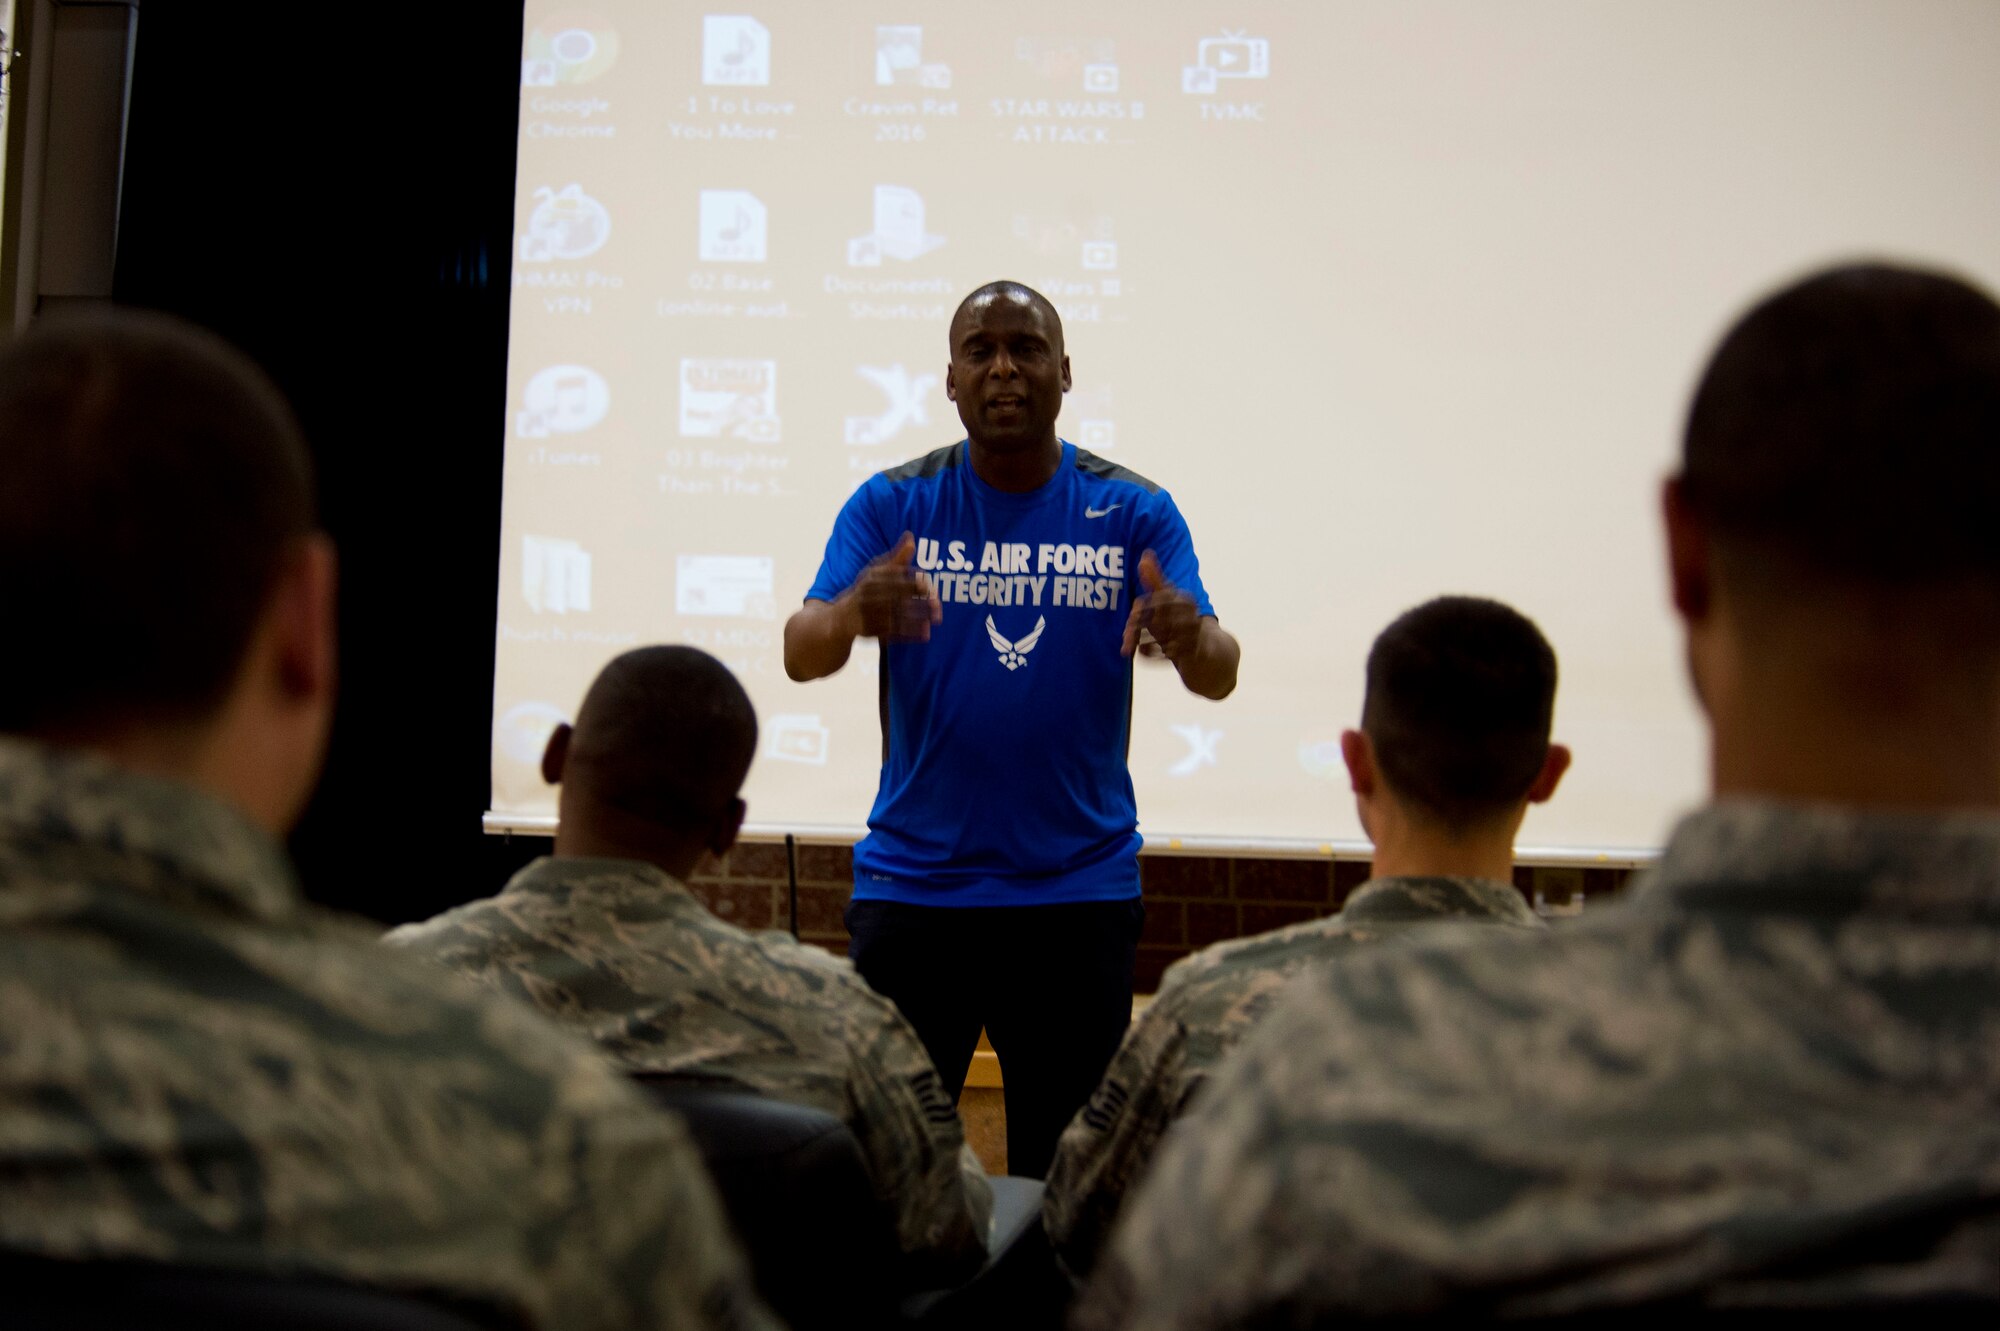 Retired U.S. Air Force Chief Master Sgt. Juan Lewis, known as the Fired Up Chief, speaks to NCOs during a Tier II private organization meeting at the Brick House on Spangdahlem Air Base, Germany, July 12, 2016. Lewis retired in 2012 after 28 years of military service. (U.S. Air Force Photo by Staff Sgt. Joe W. McFadden/Released)